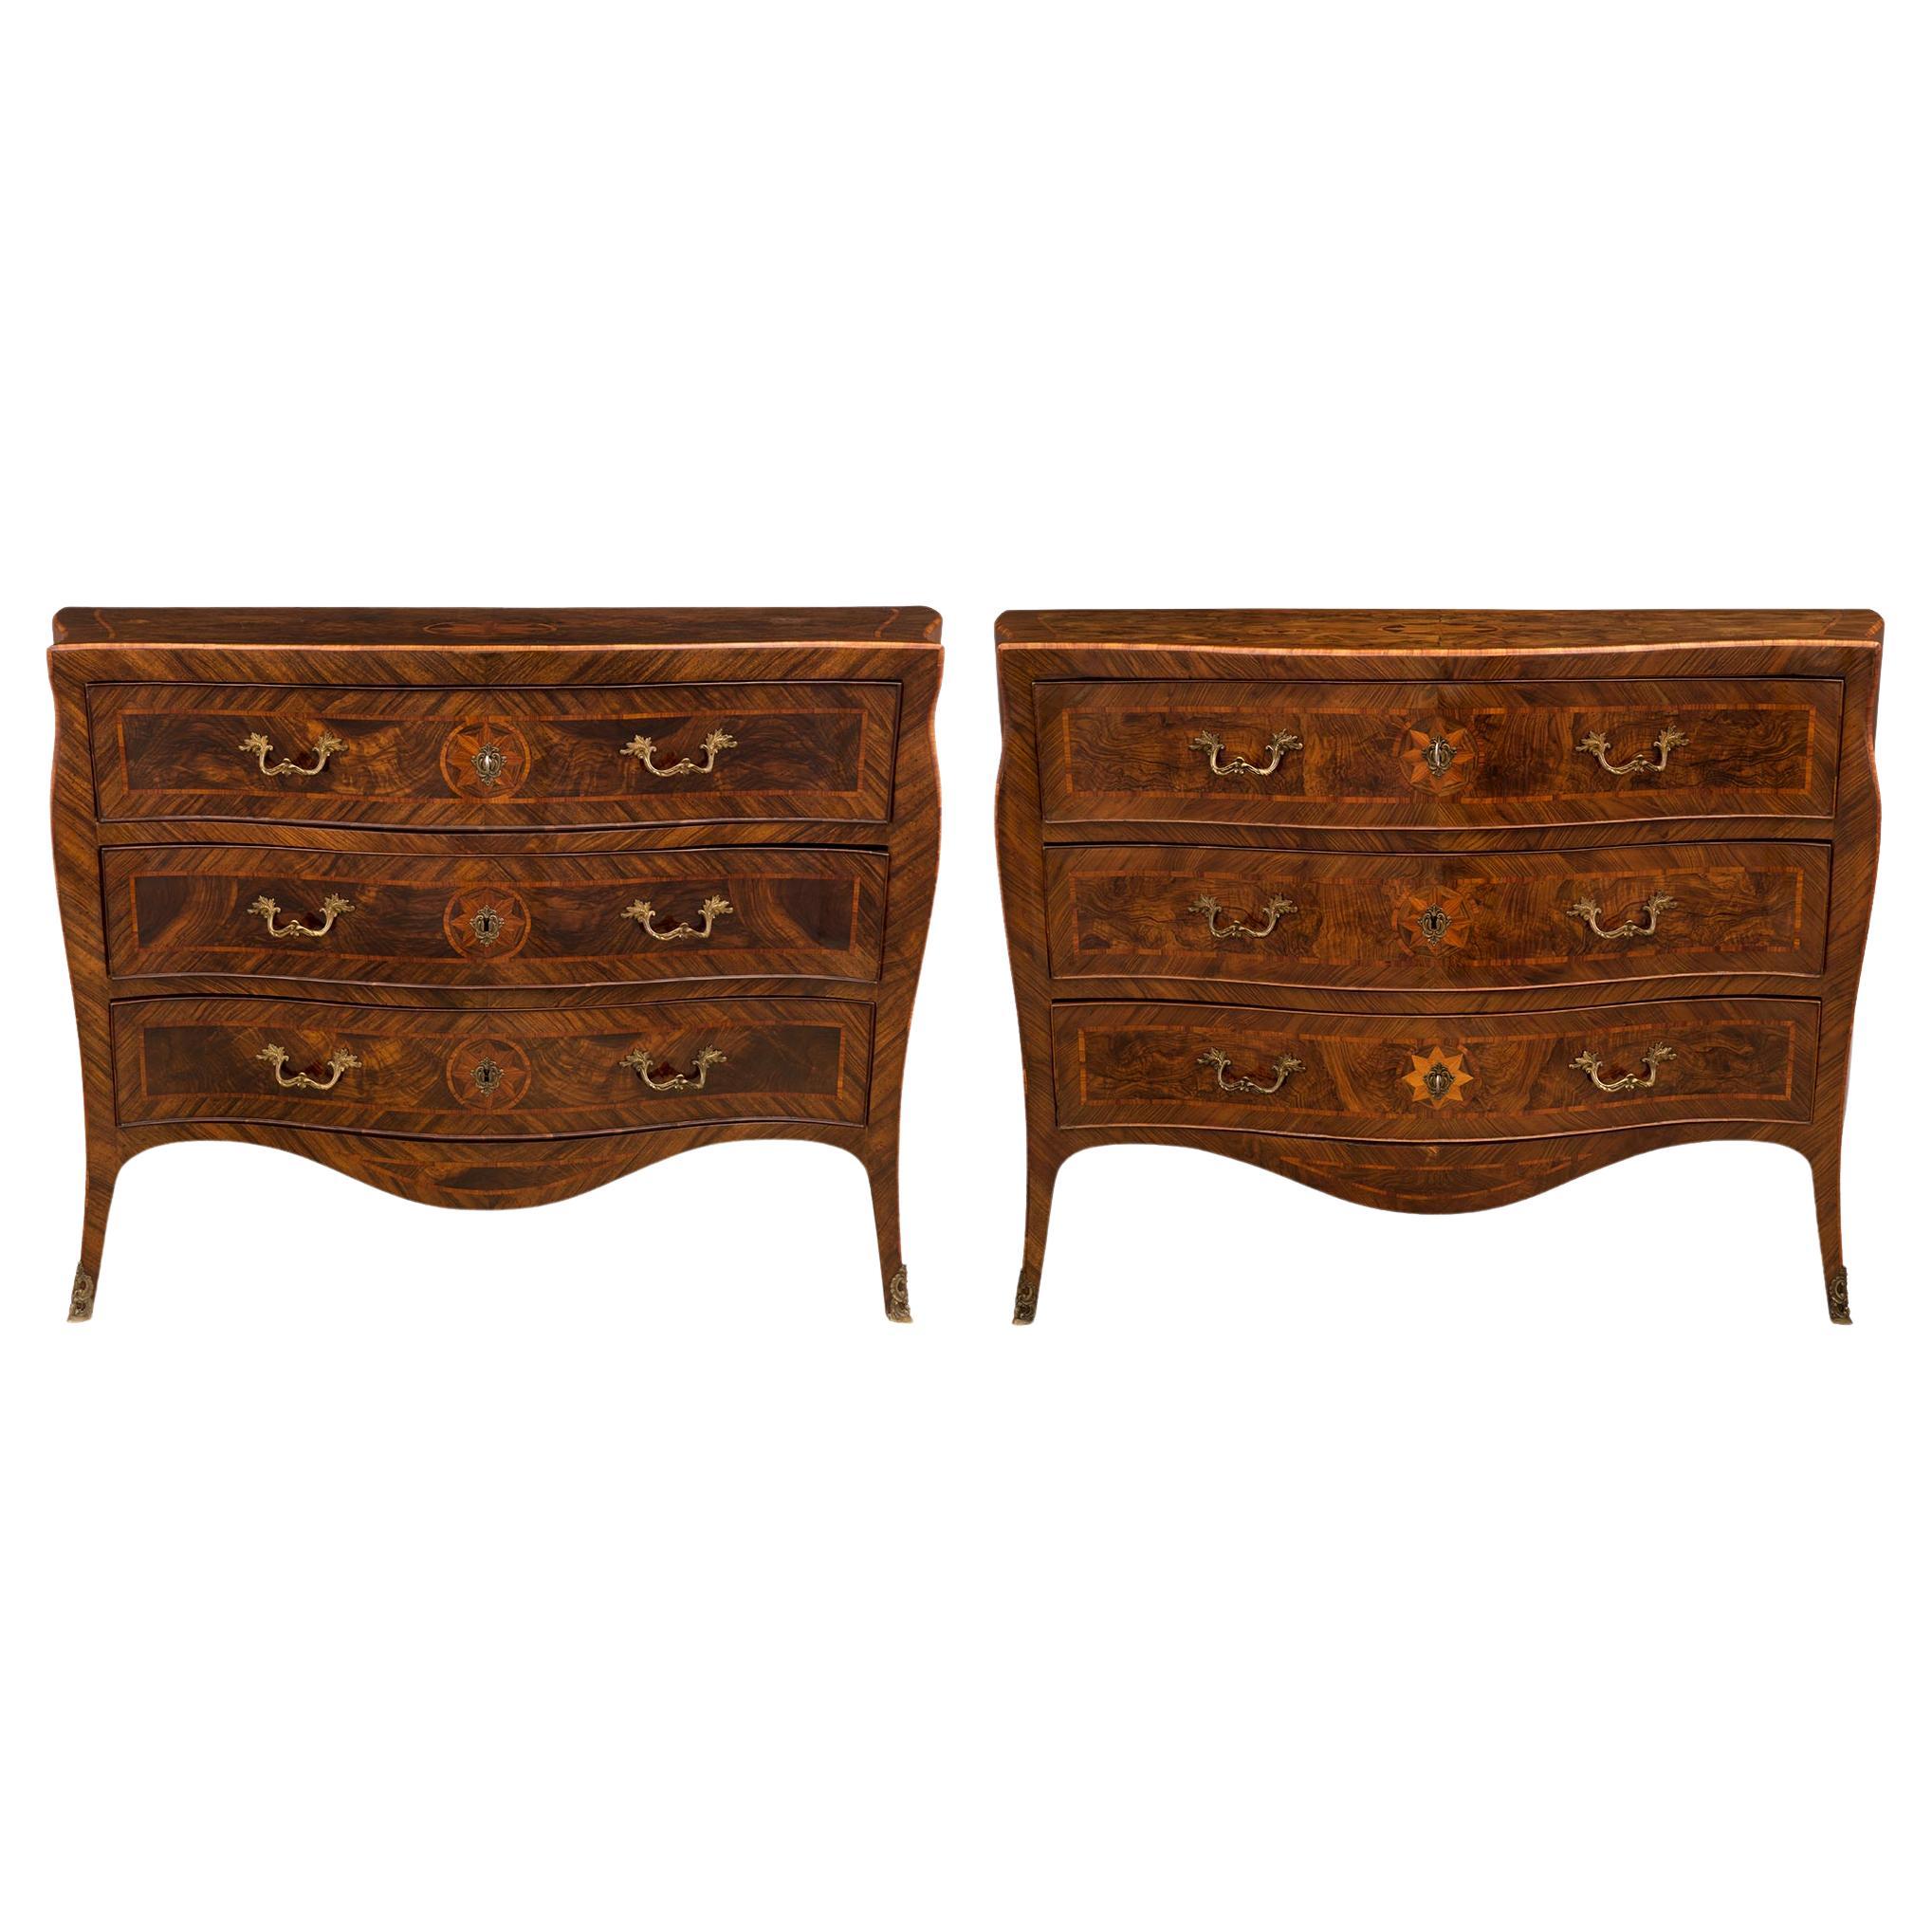 Italian 18th Century Louis XV Period Walnut His and Her Commodes